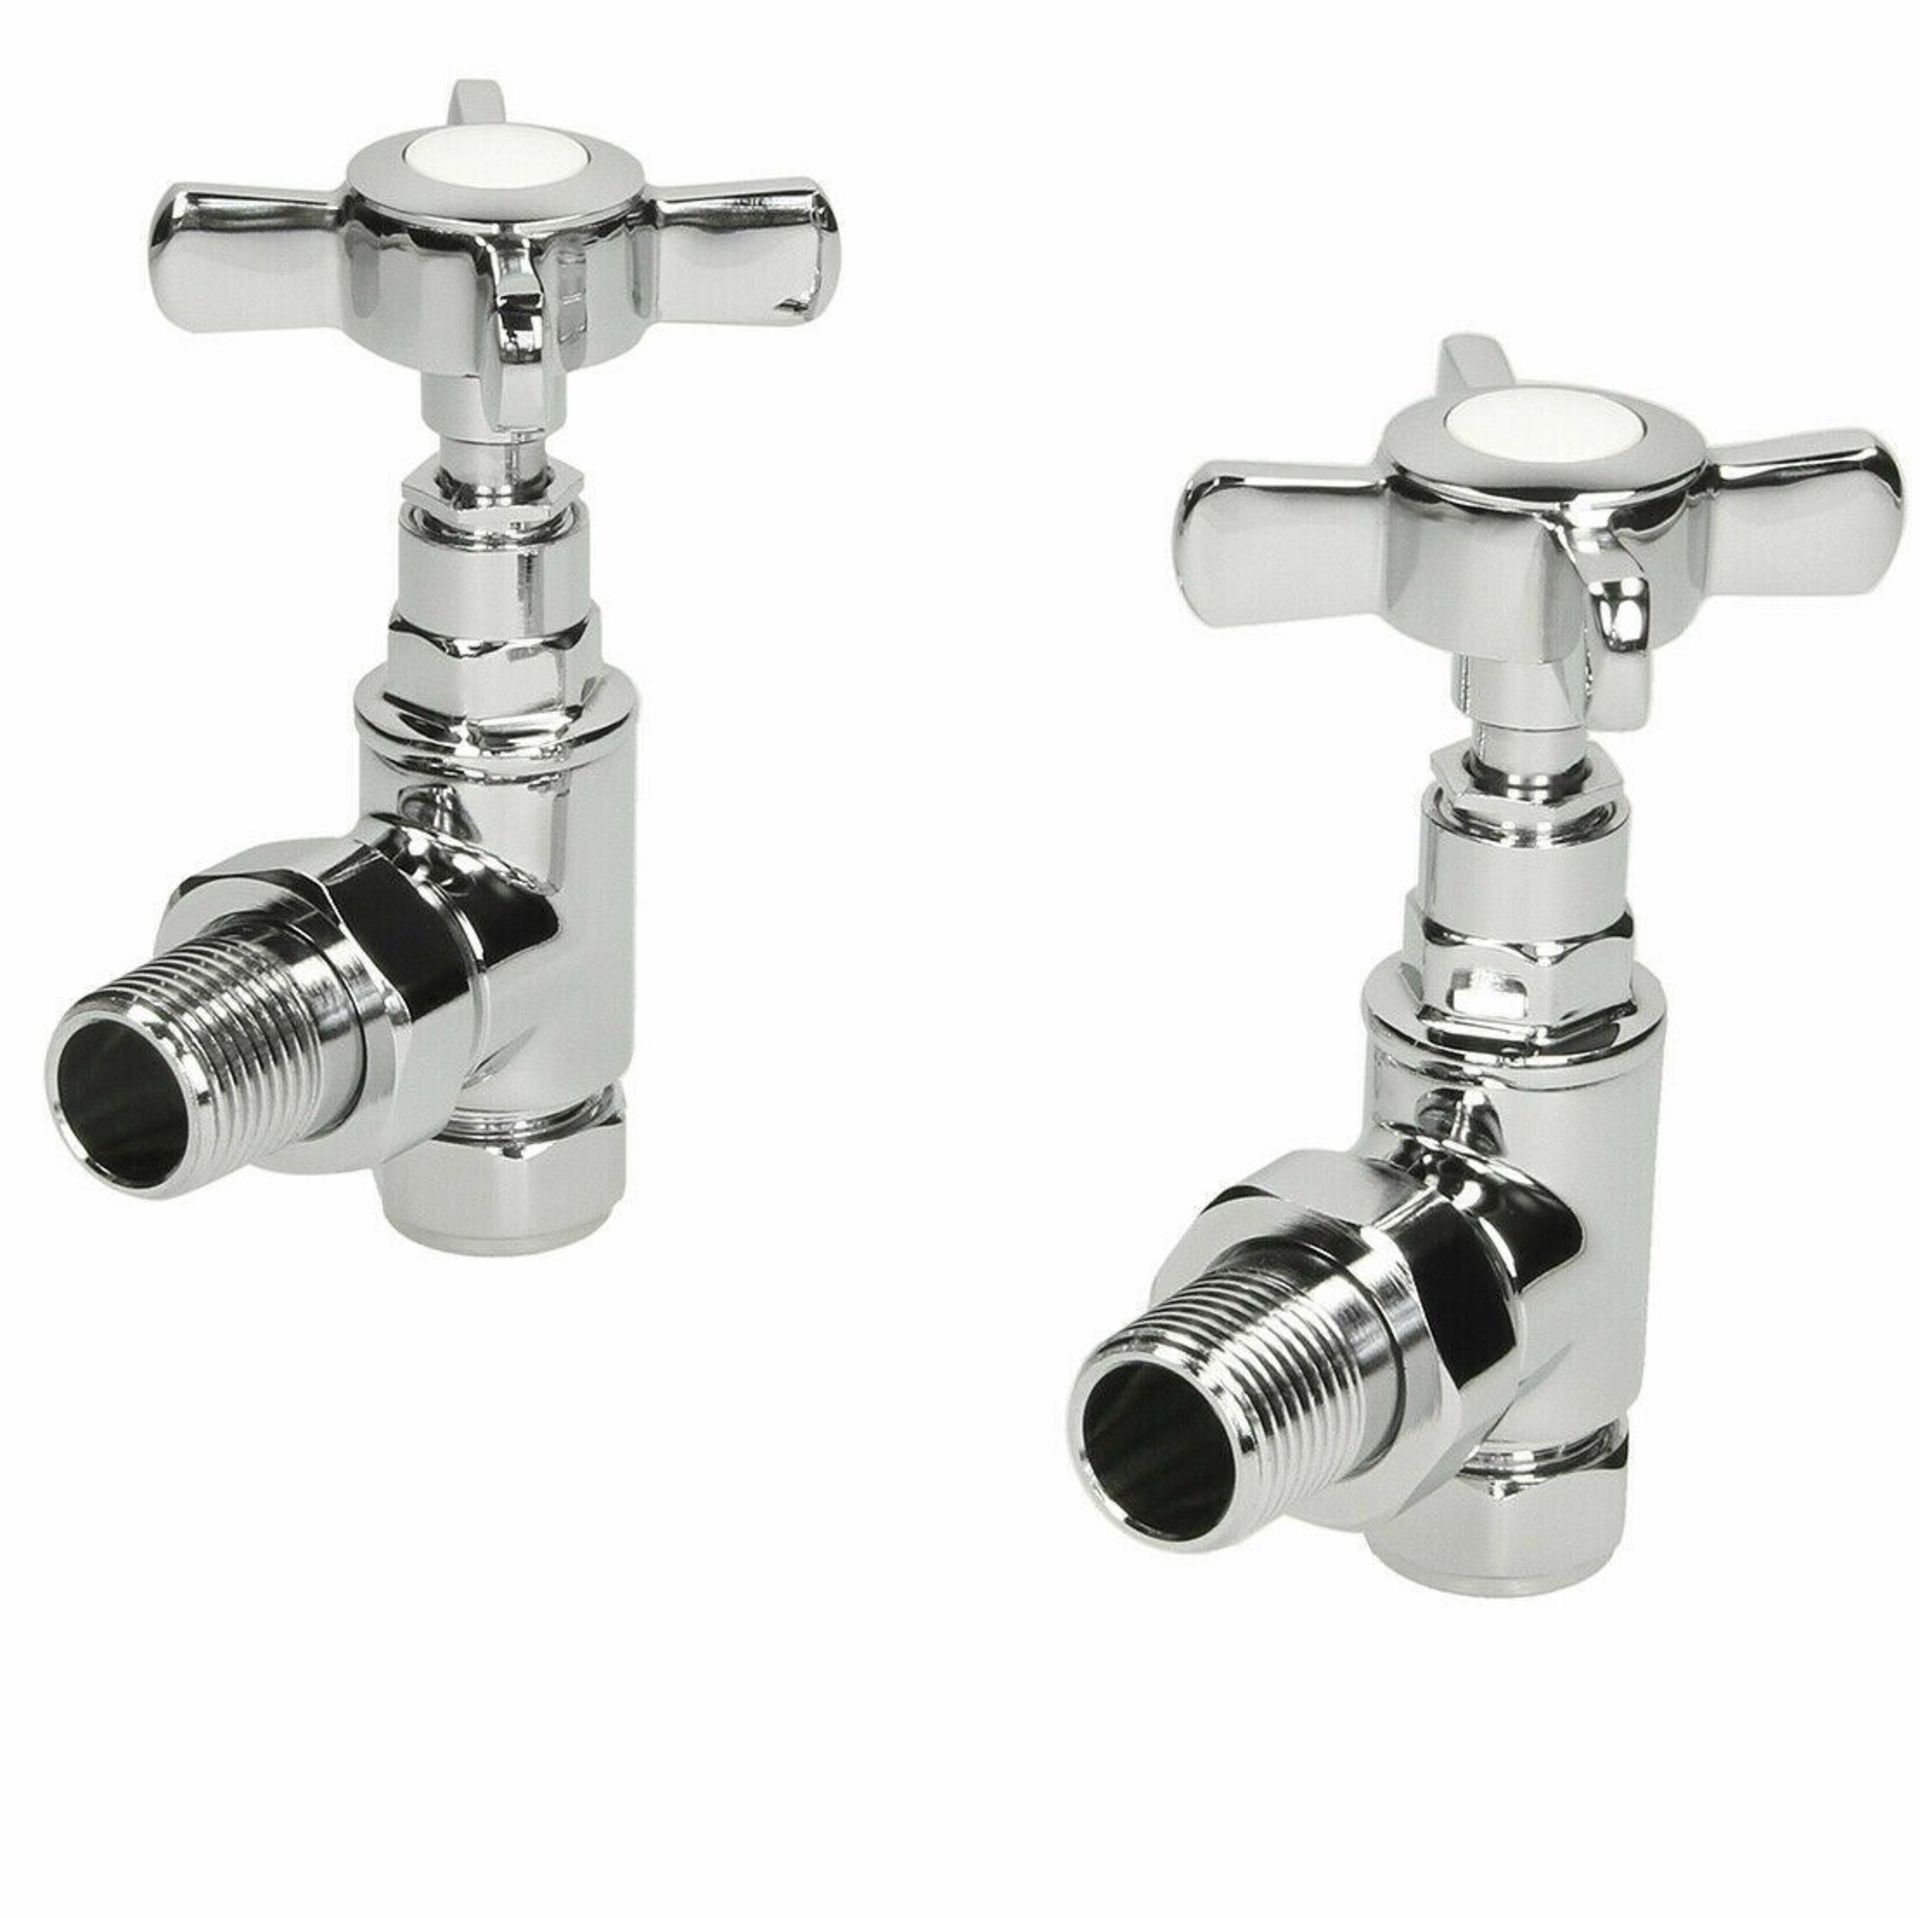 Traditional Angled Heated Towel Rail Radiator Valves Cross Head Pair 15mm Manual. For those wh... - Image 2 of 2